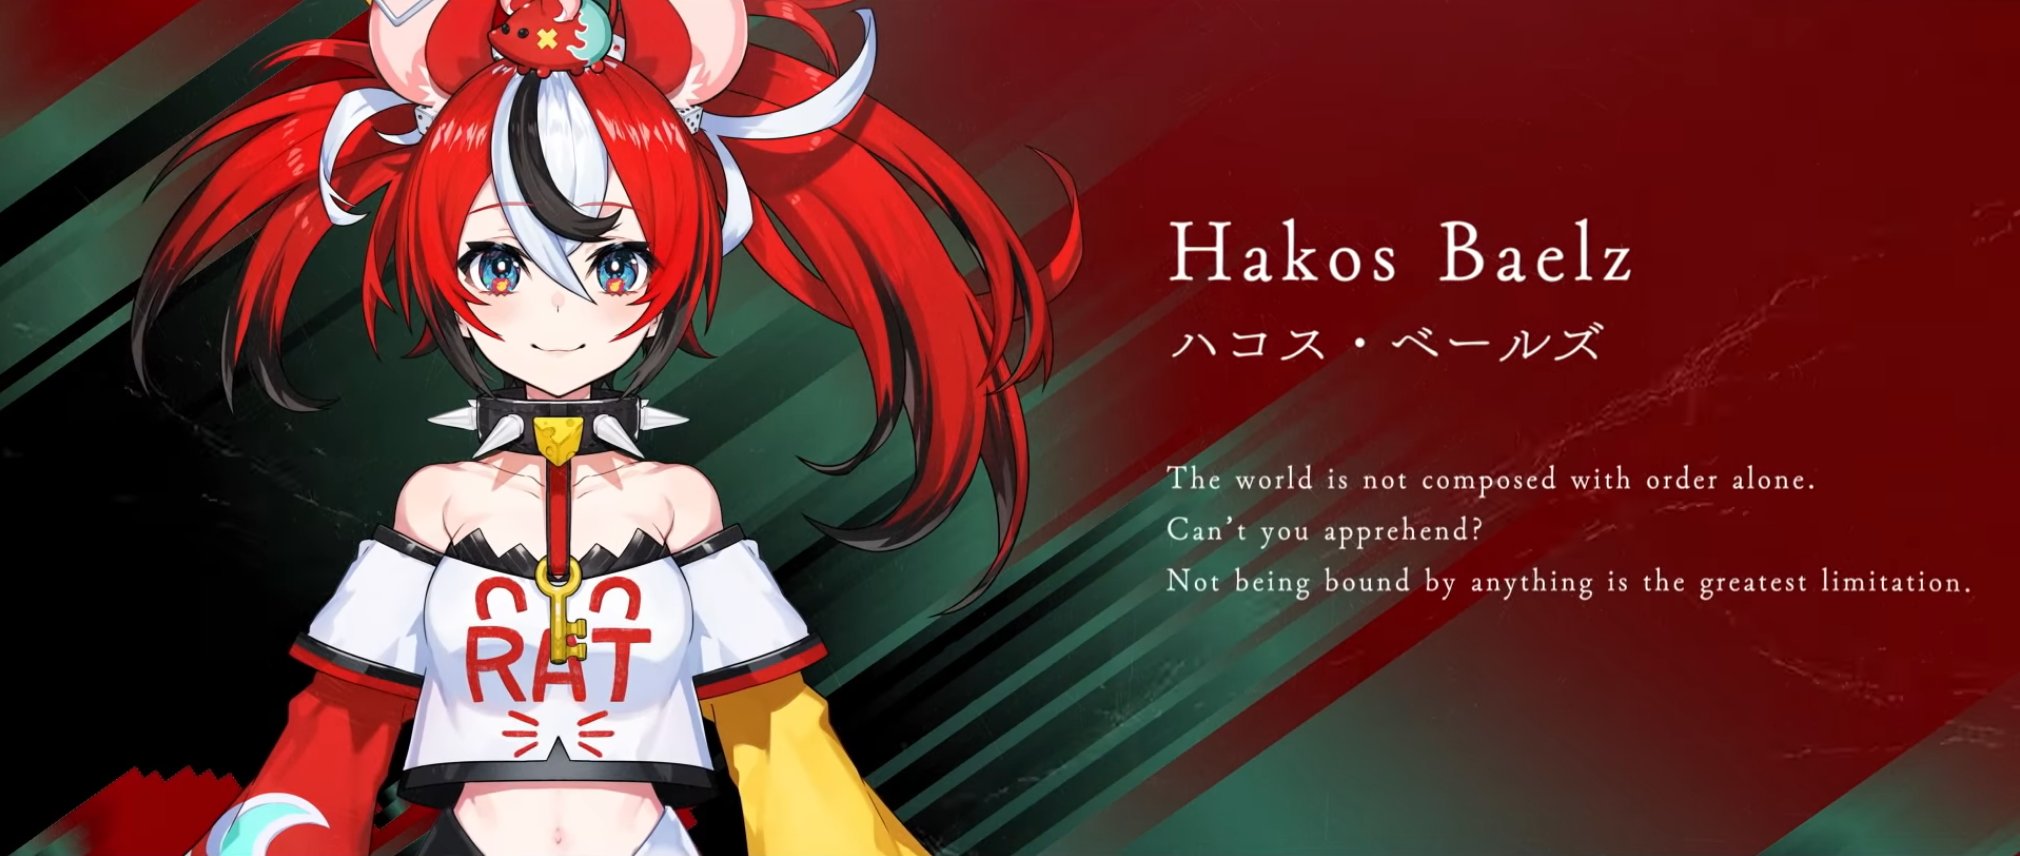 Kars English debuts new vtuber Hakos Baelz whose character designer is Mika Pikazo. Her first stream will be on August 22 at 8:00 AM JST